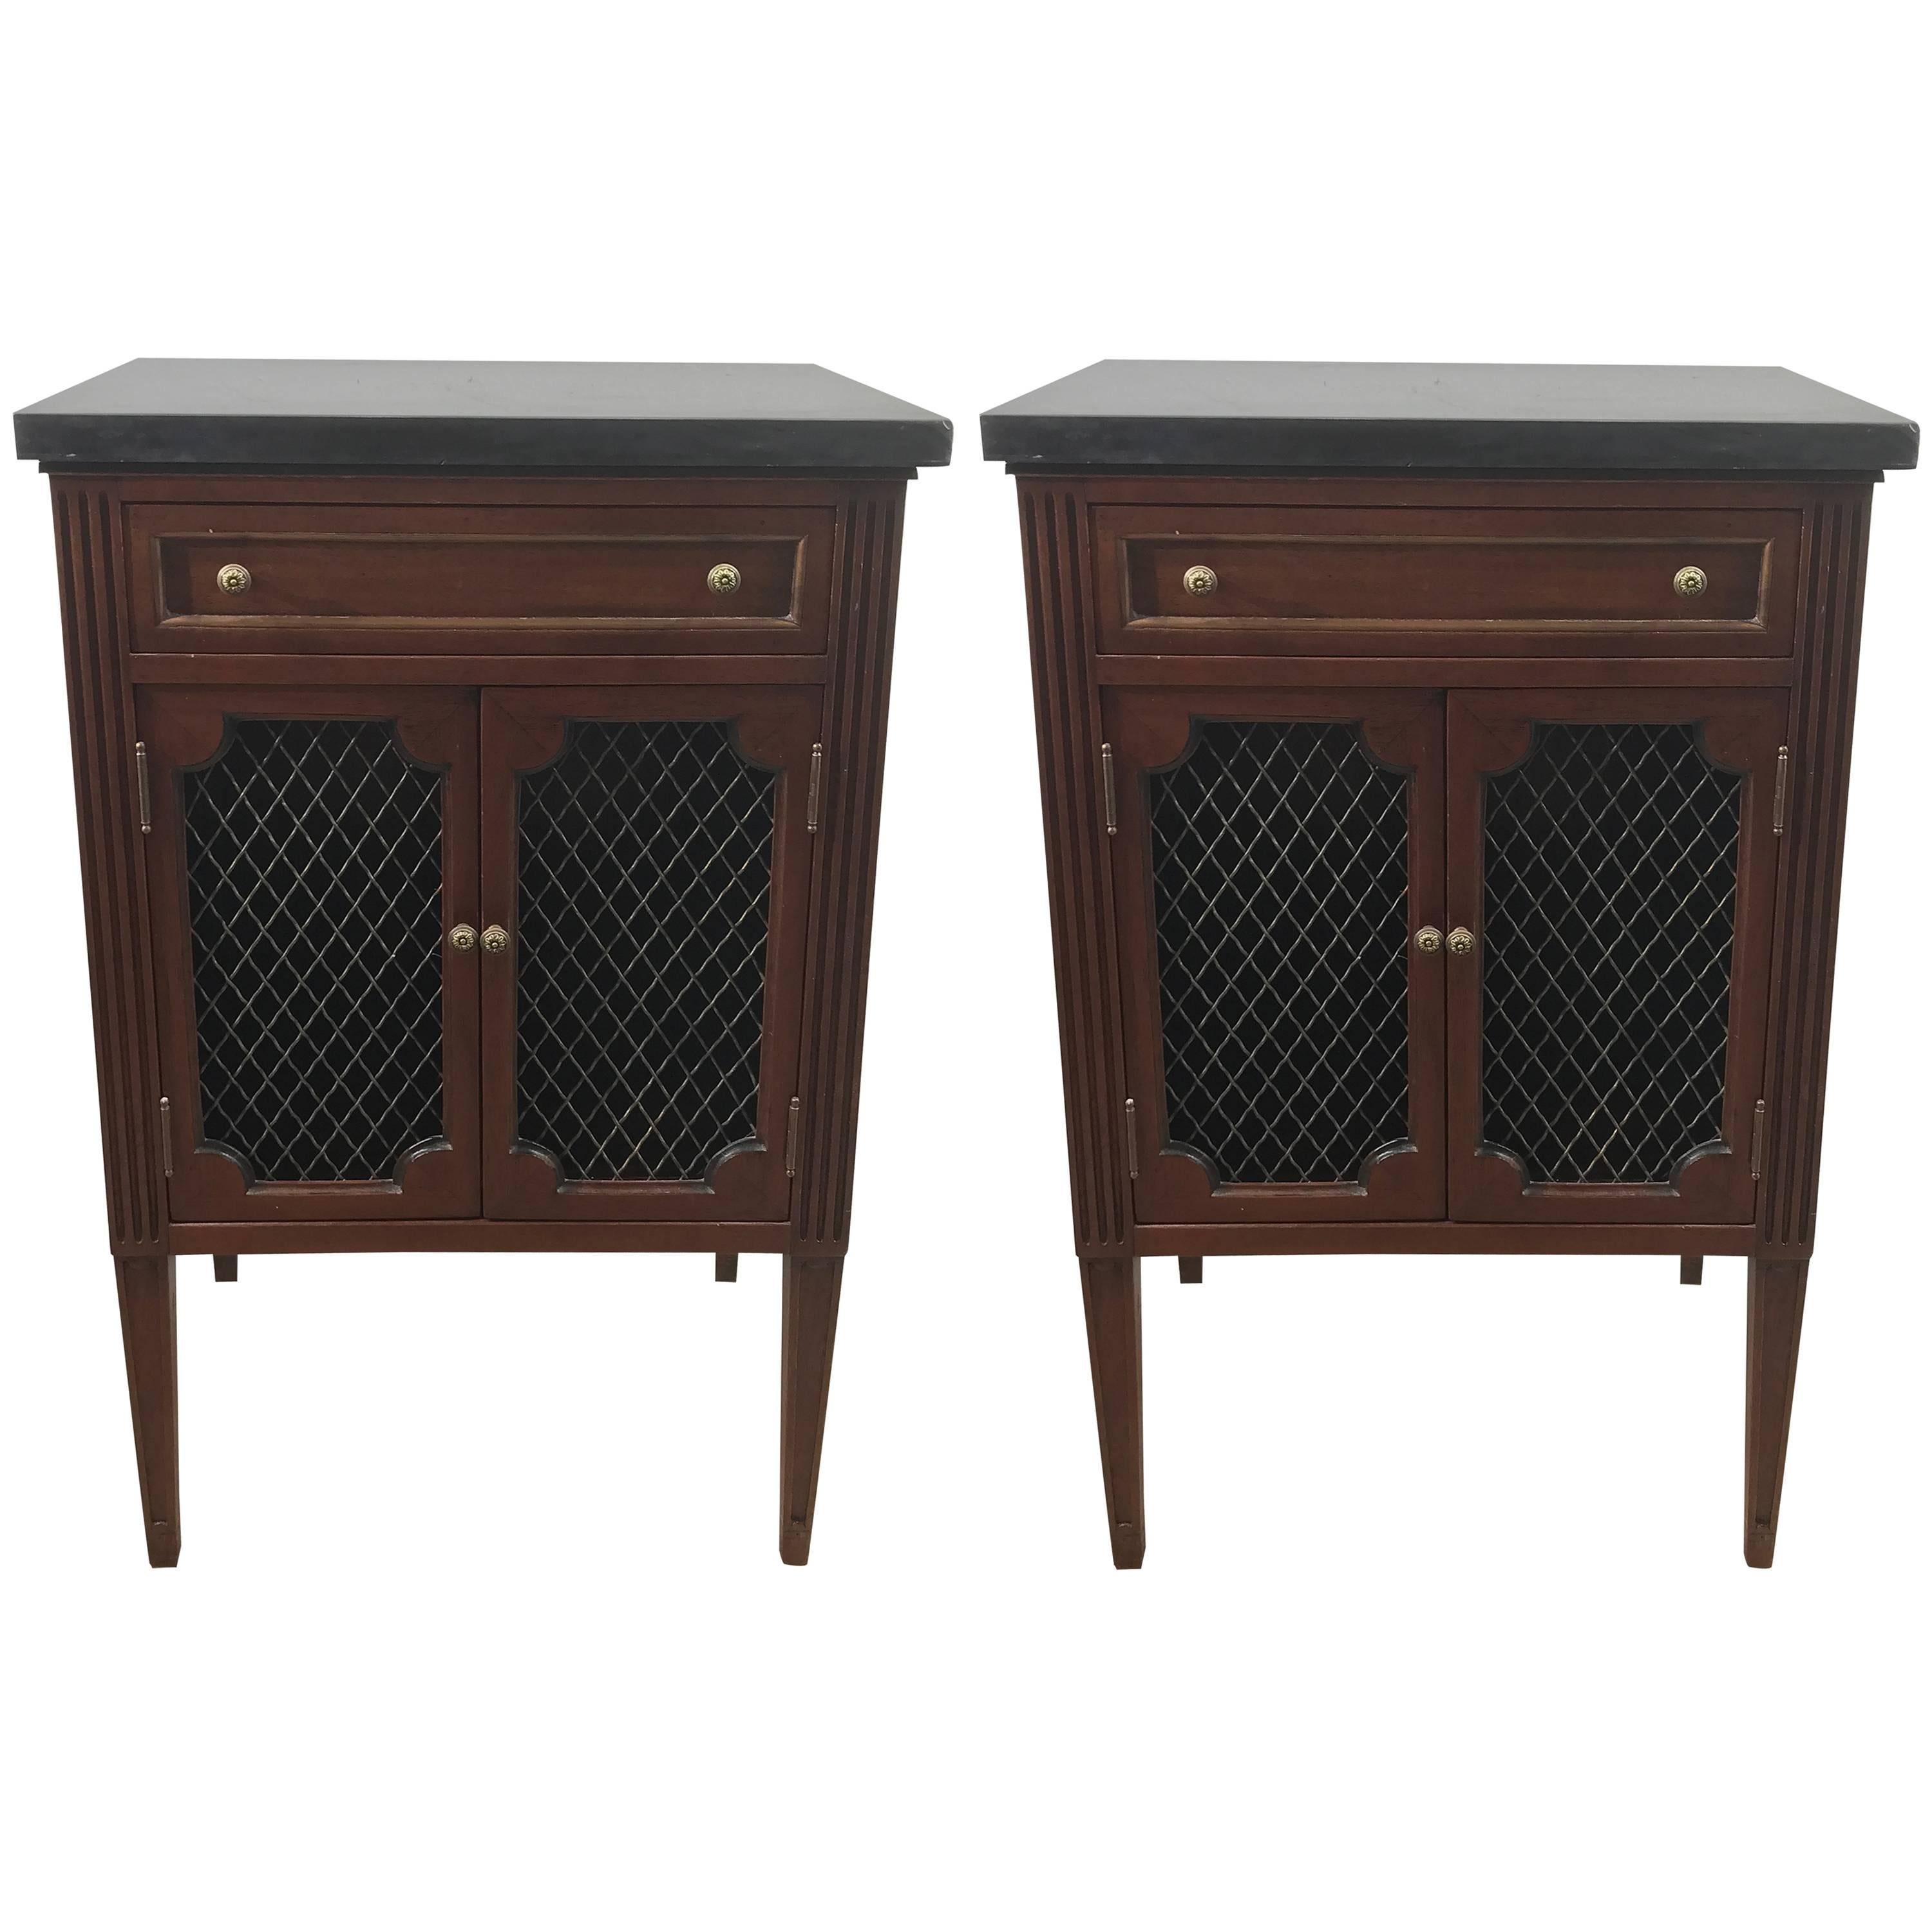 Pair of Marble-Top Directoire Brass-Mounted End Tables or Nightstands